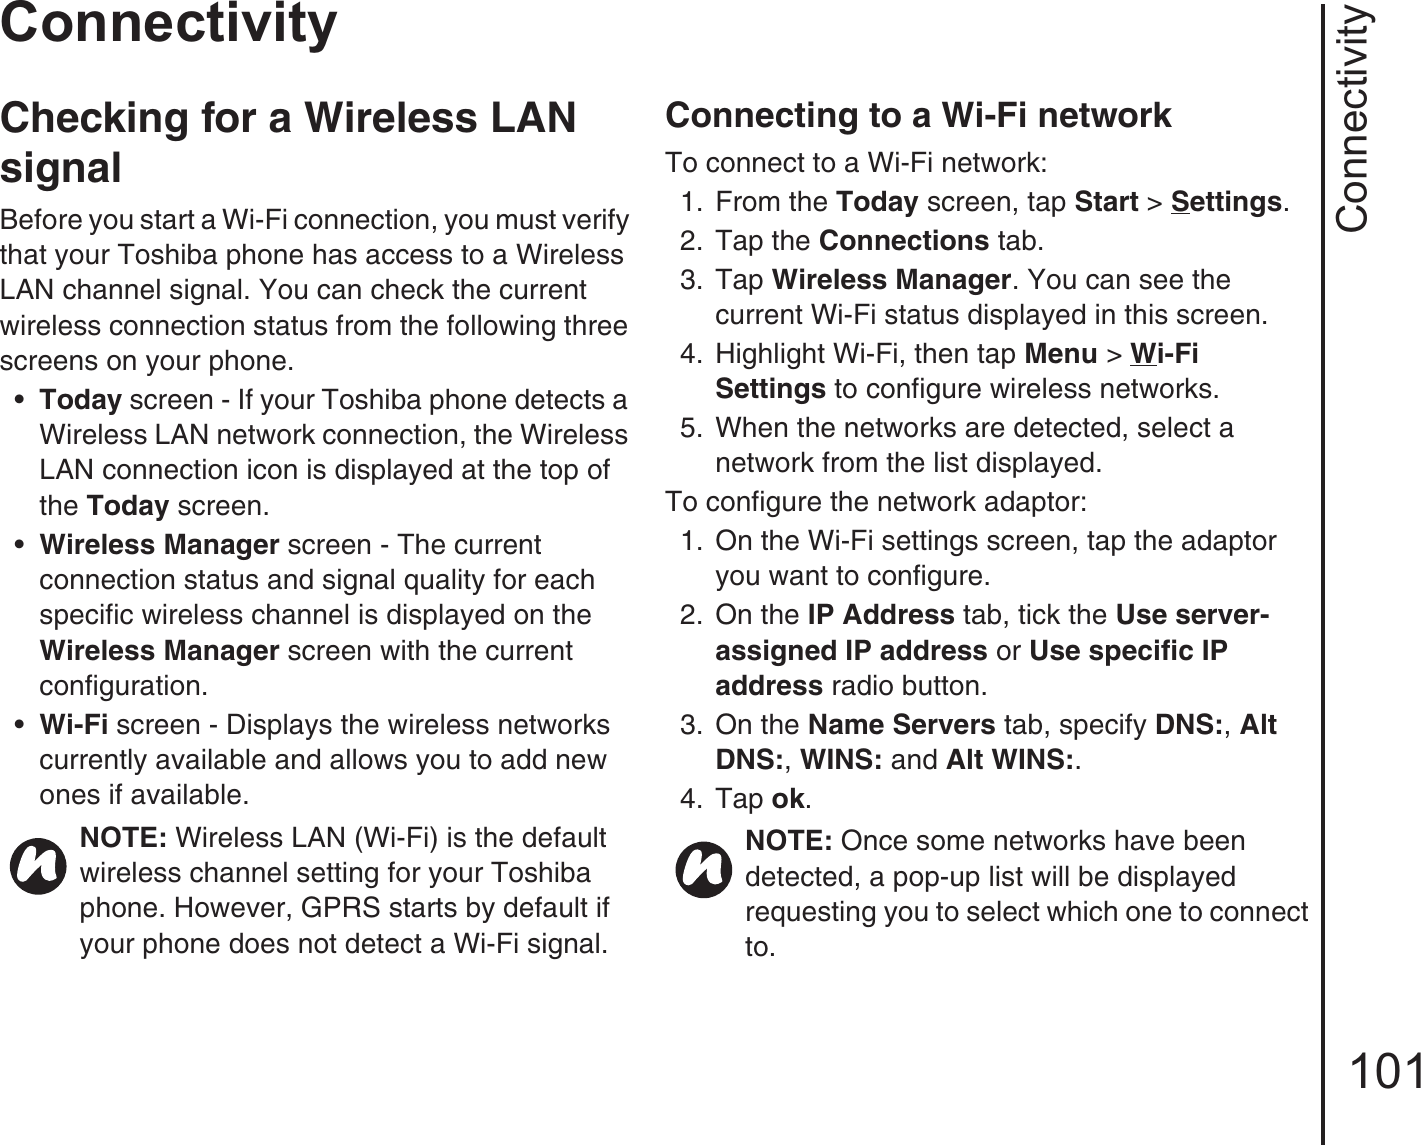 Connectivity101ConnectivityChecking for a Wireless LAN signalBefore you start a Wi-Fi connection, you must verify that your Toshiba phone has access to a Wireless LAN channel signal. You can check the current wireless connection status from the following three screens on your phone.•Today screen - If your Toshiba phone detects a Wireless LAN network connection, the Wireless LAN connection icon is displayed at the top of the Today screen.•Wireless Manager screen - The current connection status and signal quality for each specific wireless channel is displayed on the Wireless Manager screen with the current configuration.•Wi-Fi screen - Displays the wireless networks currently available and allows you to add new ones if available.Connecting to a Wi-Fi networkTo connect to a Wi-Fi network:1.  From the Today screen, tap Start &gt; Settings.2.  Tap the Connections tab.3.  Tap Wireless Manager. You can see the current Wi-Fi status displayed in this screen.4.  Highlight Wi-Fi, then tap Menu &gt; Wi-Fi Settings to configure wireless networks.5.  When the networks are detected, select a network from the list displayed.To configure the network adaptor:1. On the Wi-Fi settings screen, tap the adaptor you want to configure.2.  On the IP Address tab, tick the Use server-assigned IP address or Use specific IP address radio button.3.  On the Name Servers tab, specify DNS:, Alt DNS:, WINS: and Alt WINS:.4.  Tap ok.NOTE: Wireless LAN (Wi-Fi) is the default wireless channel setting for your Toshiba phone. However, GPRS starts by default if your phone does not detect a Wi-Fi signal.NOTE: Once some networks have been detected, a pop-up list will be displayed requesting you to select which one to connect to.